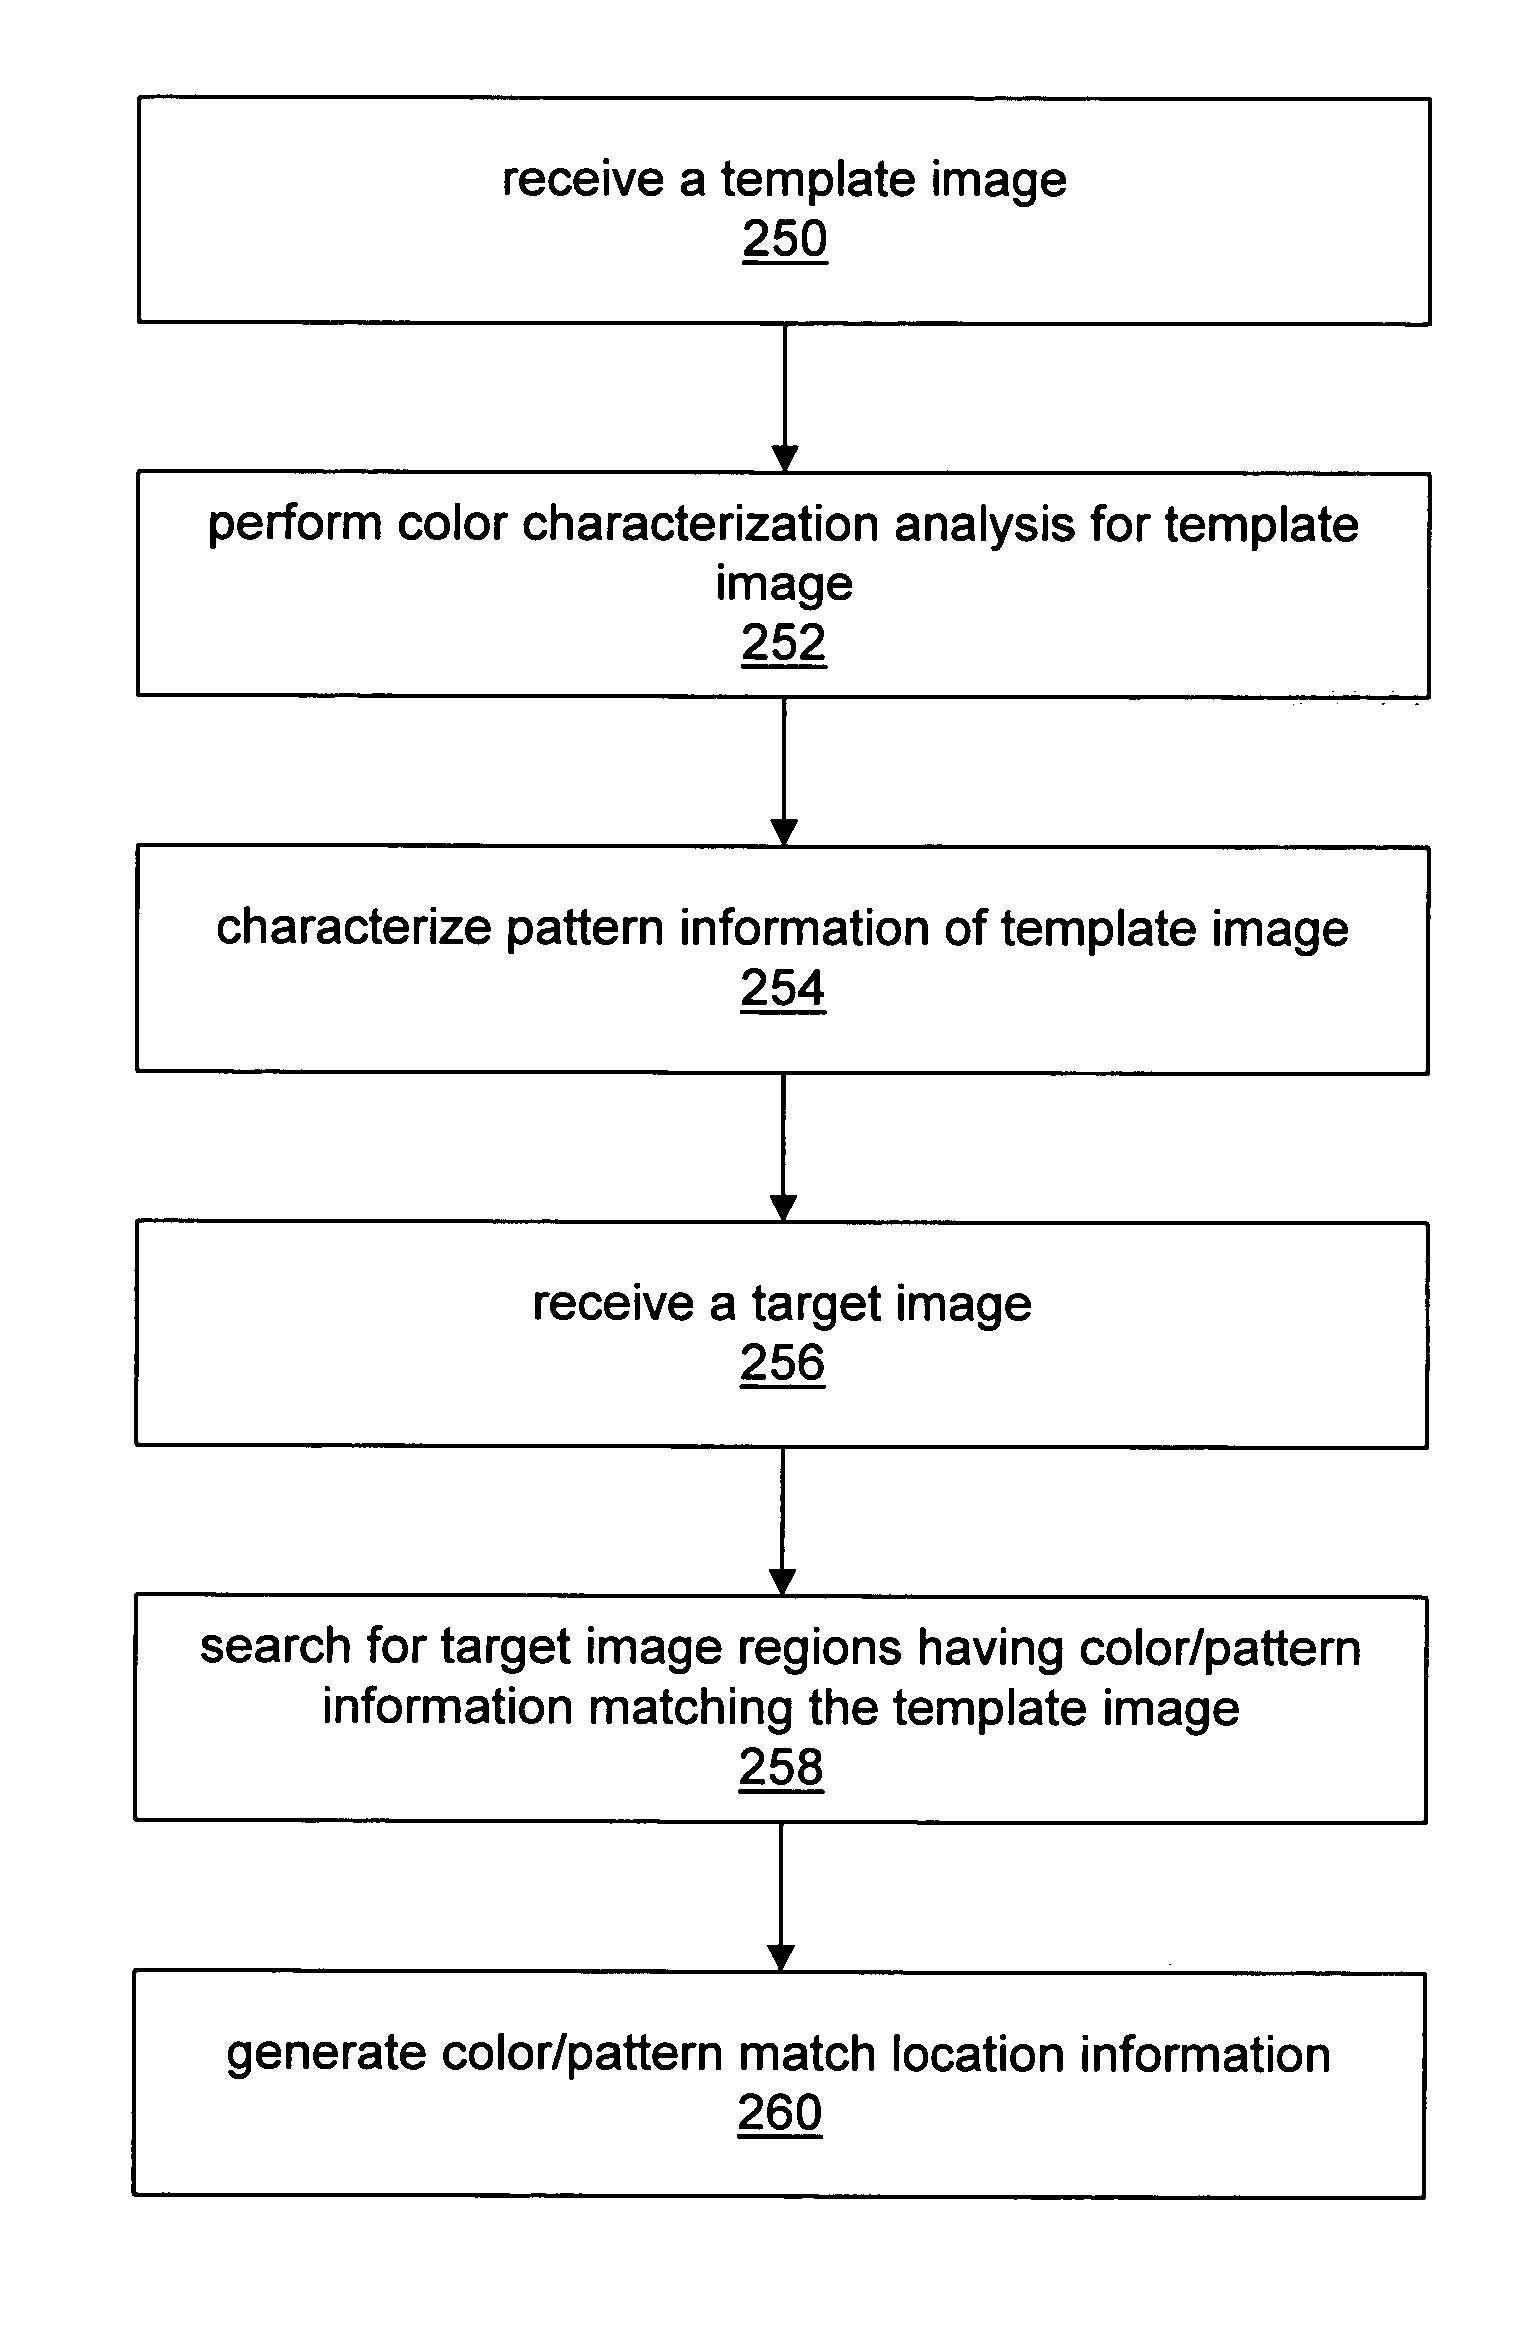 System and method for locating color and pattern match regions in a target image